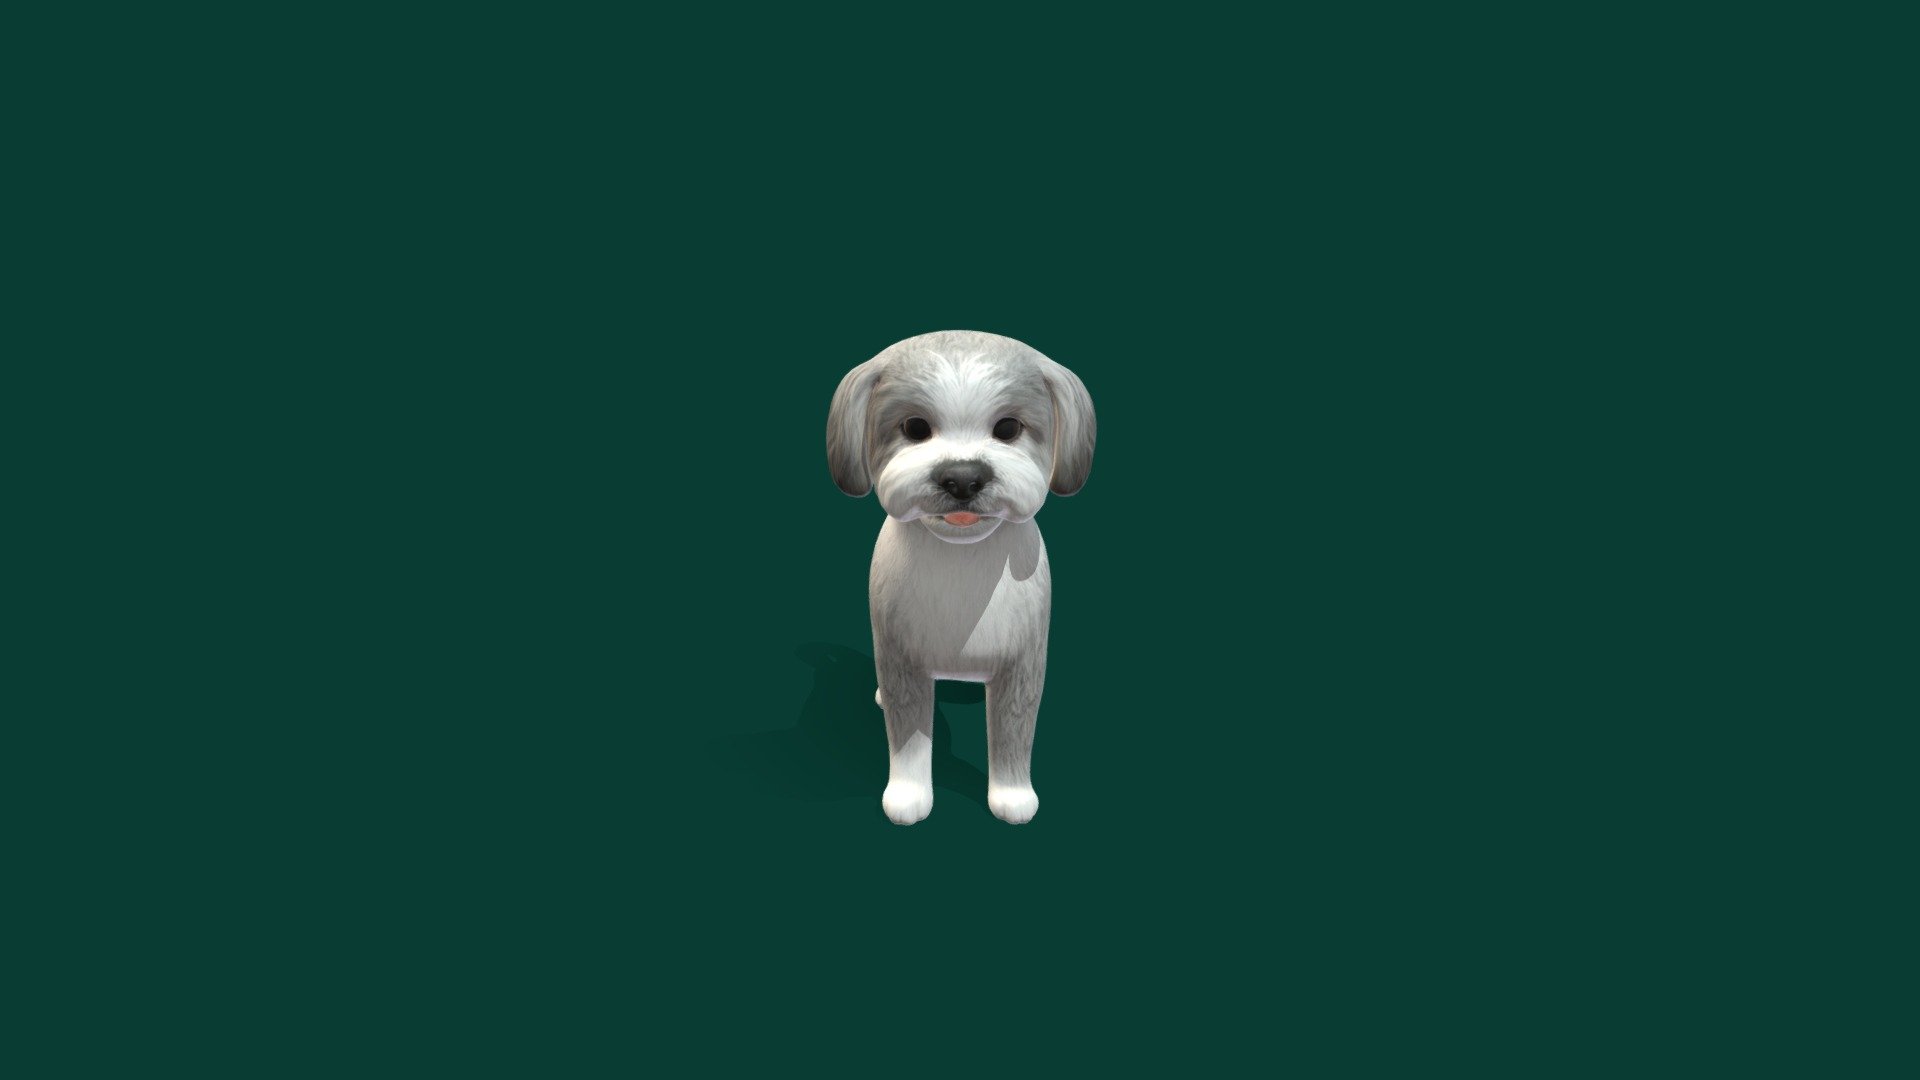 Maltese
Base Color Metallic Roughness and normal map as fbx files.
Maltese Breed
Maltese dog refers both to an ancient variety of dwarf canine from Italy and generally associated also with the island of Malta, and to a modern breed of dog in the toy group. The contemporary variety is genetically related to the Bichon, Bolognese, and Havanese breeds 3d model